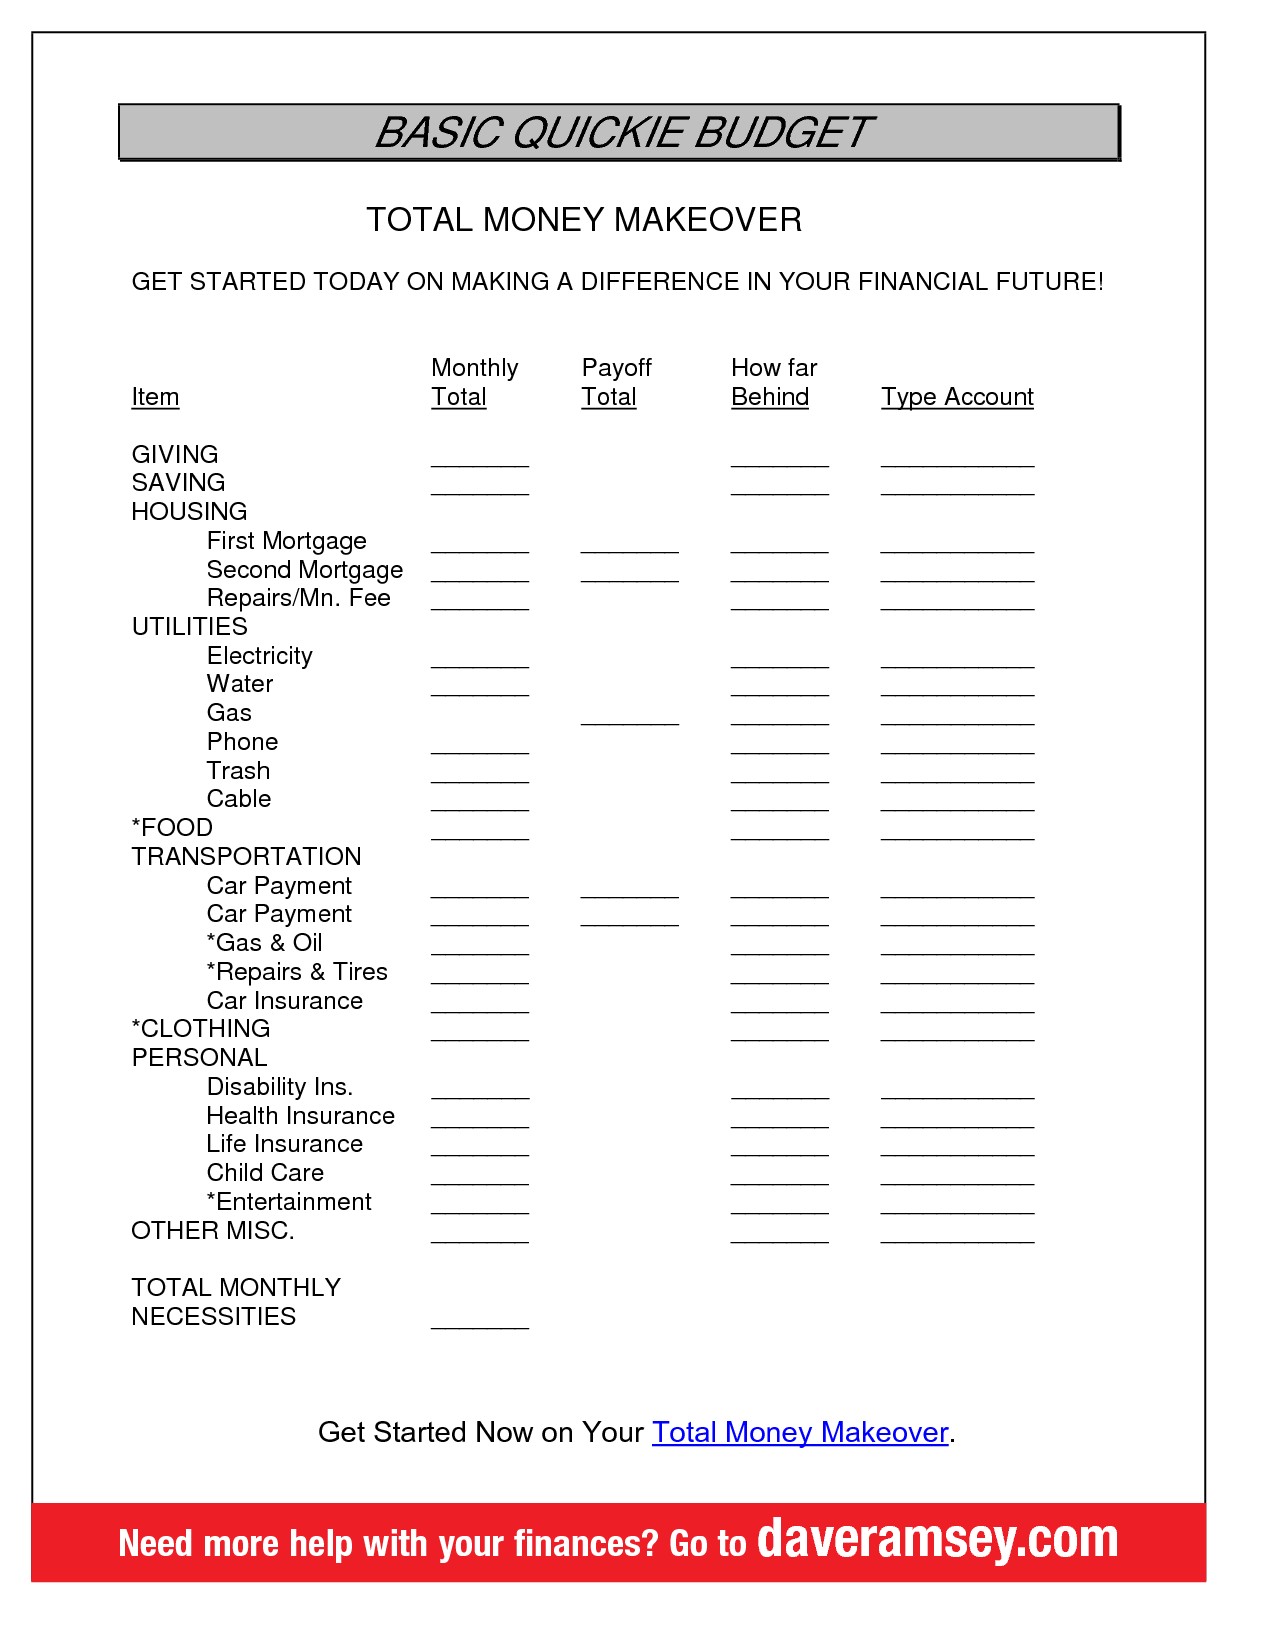 Dave Ramsey Budget Template BASIC QUICKIE BUDGET TOTAL Biblical Document